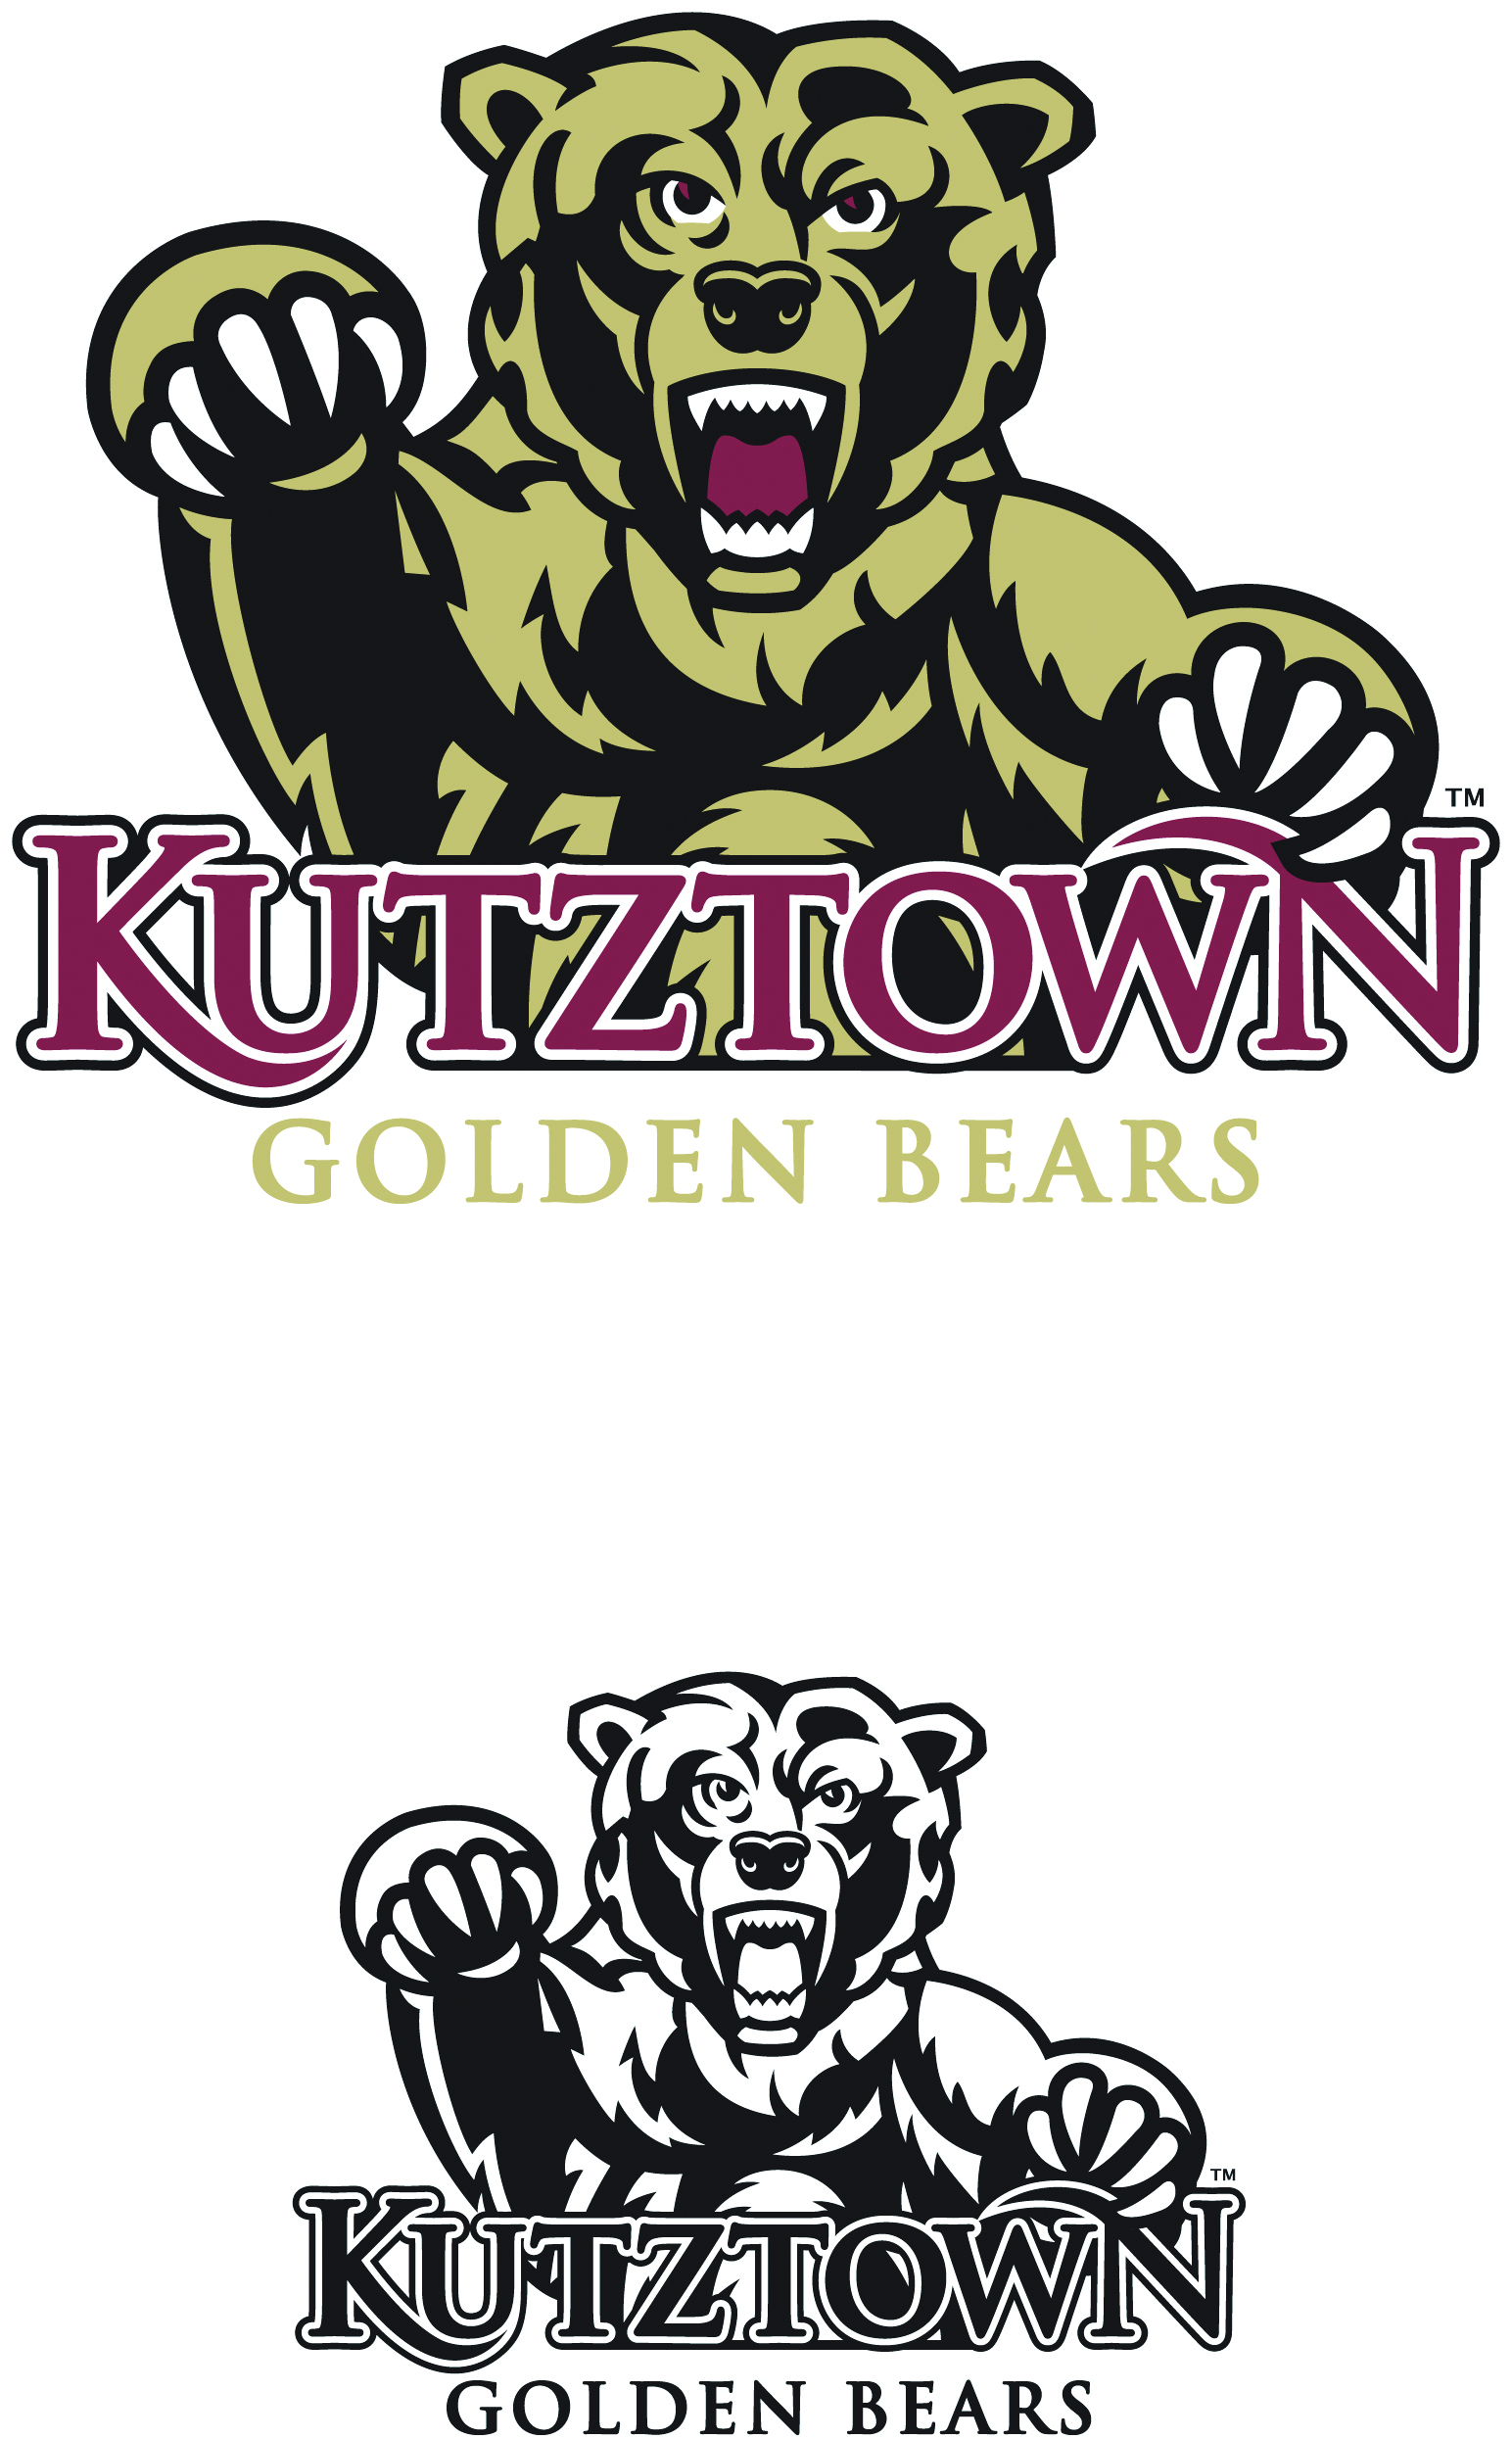 Chrome Metal with Domed Graphics WinCraft Kutztown University Golden Bears Premium Auto Emblem Decal